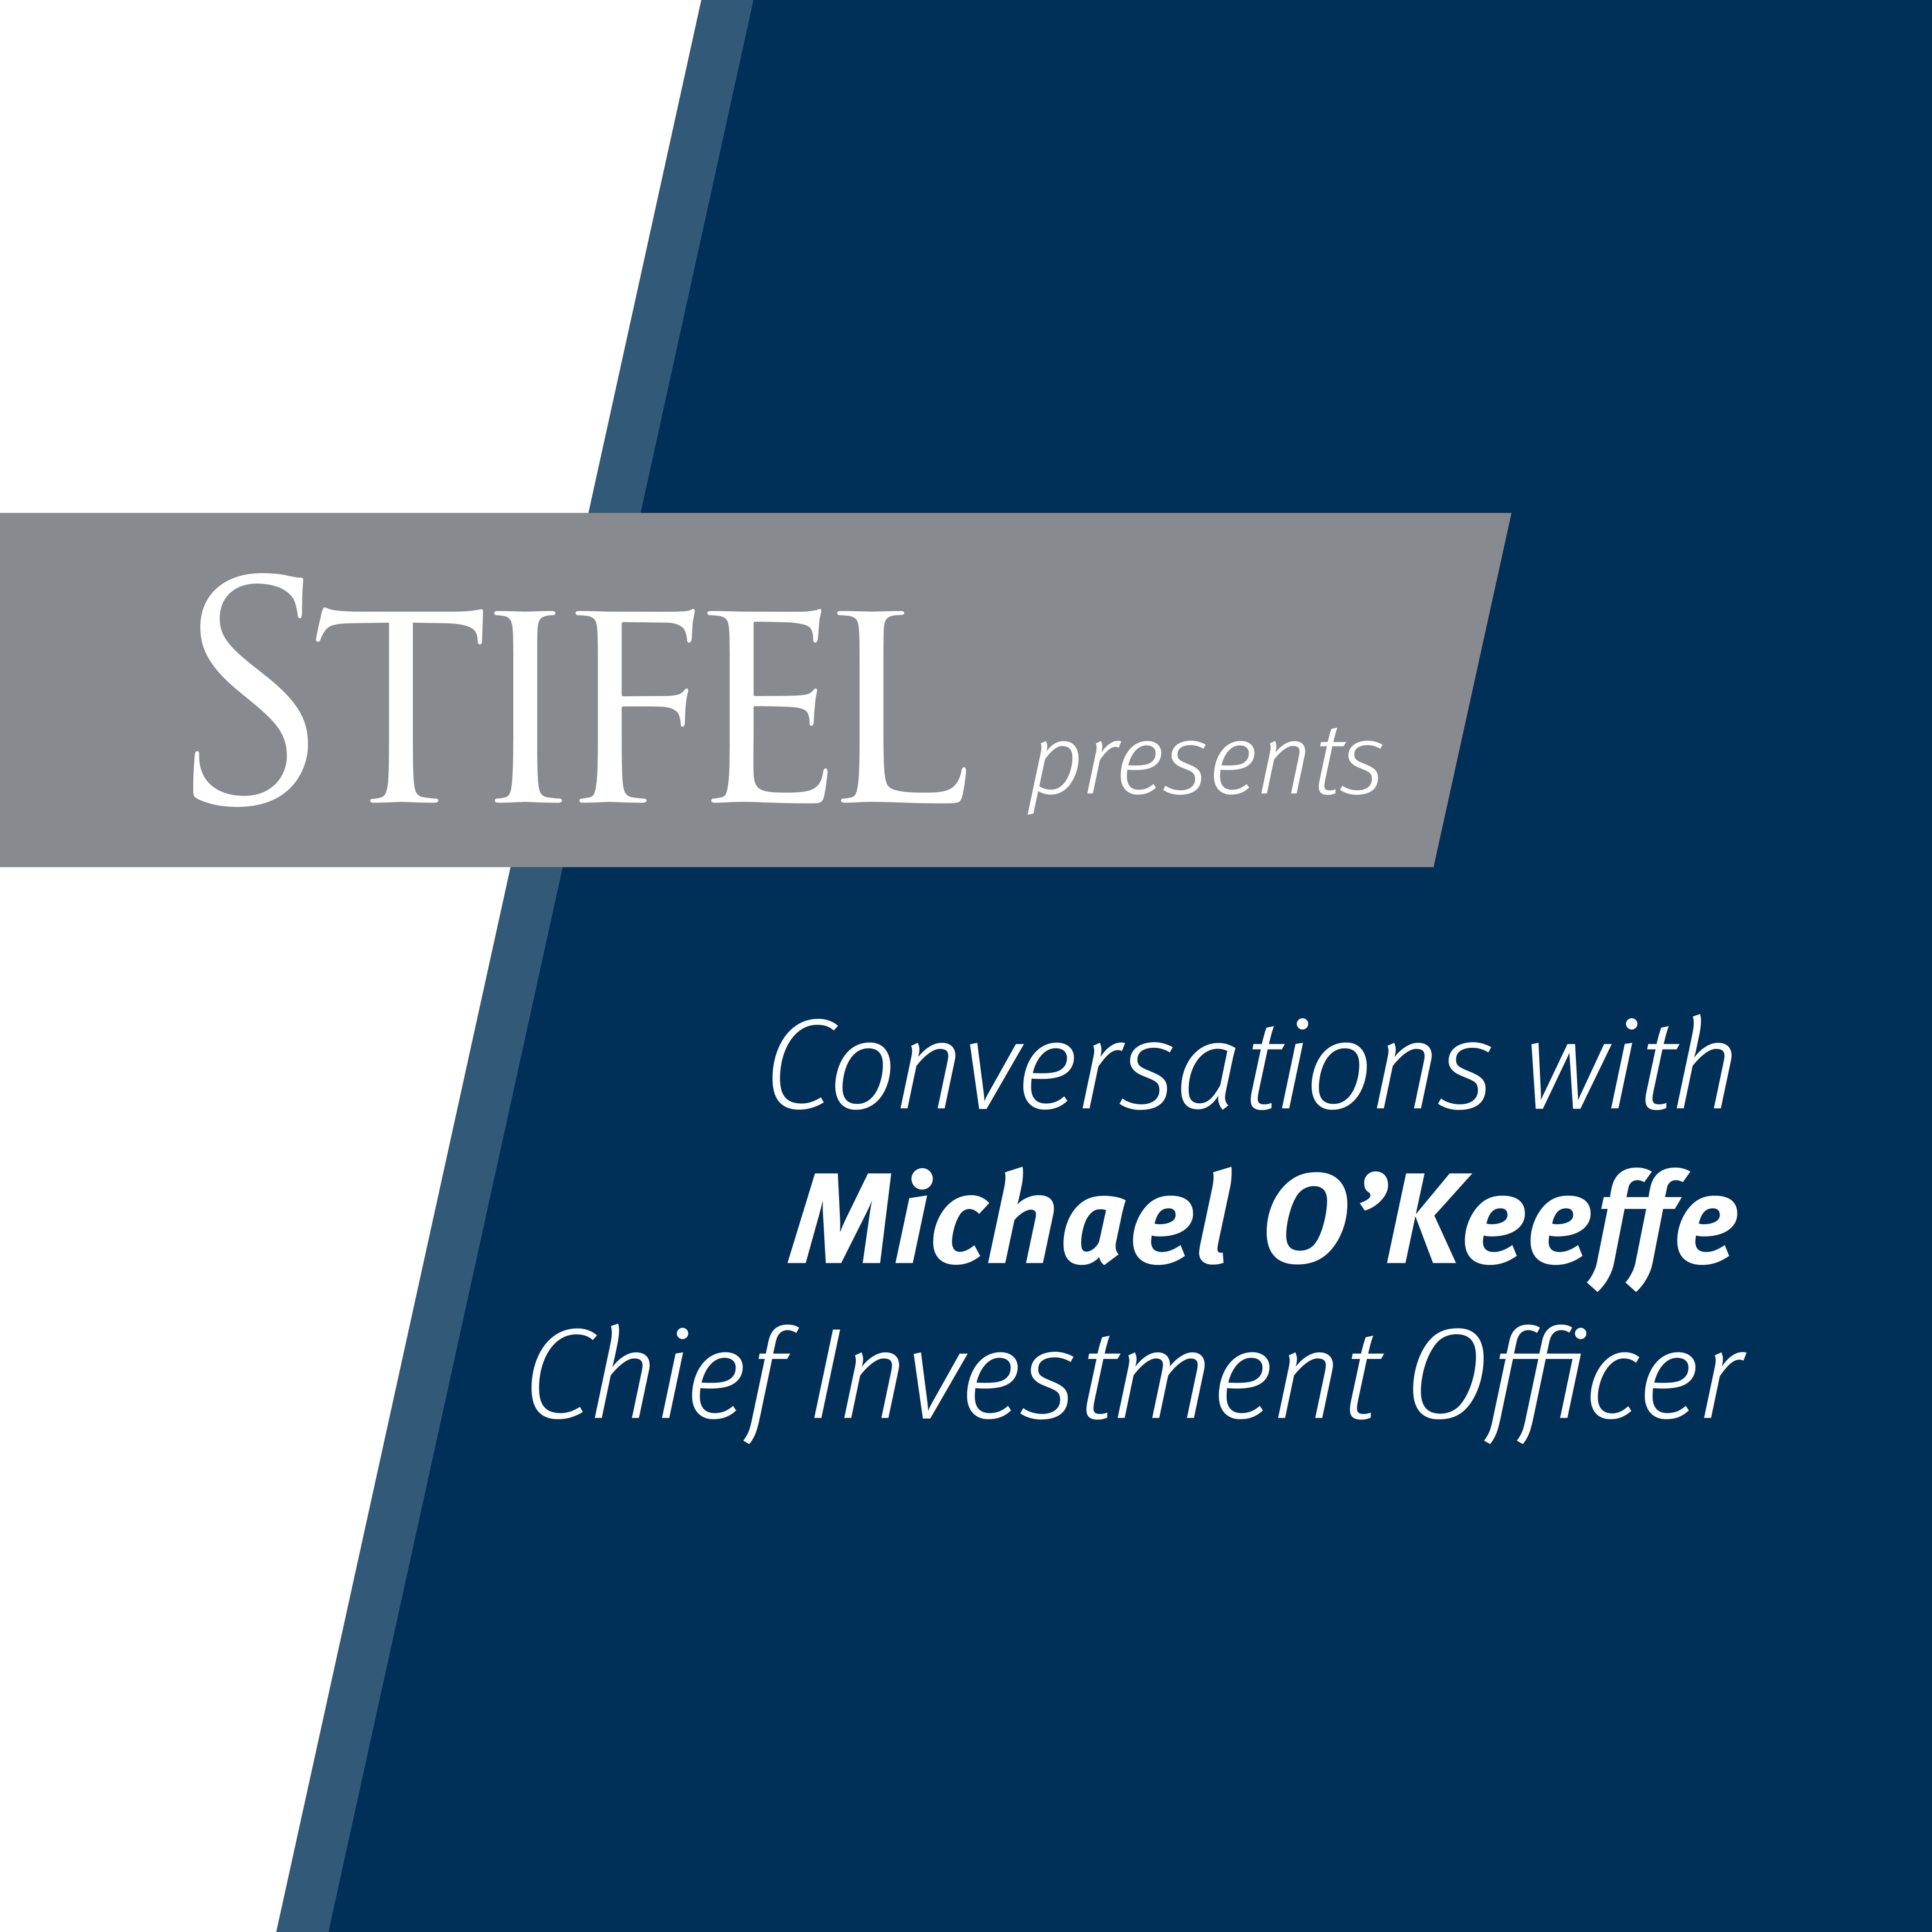 Conversations with Michael O'Keeffe